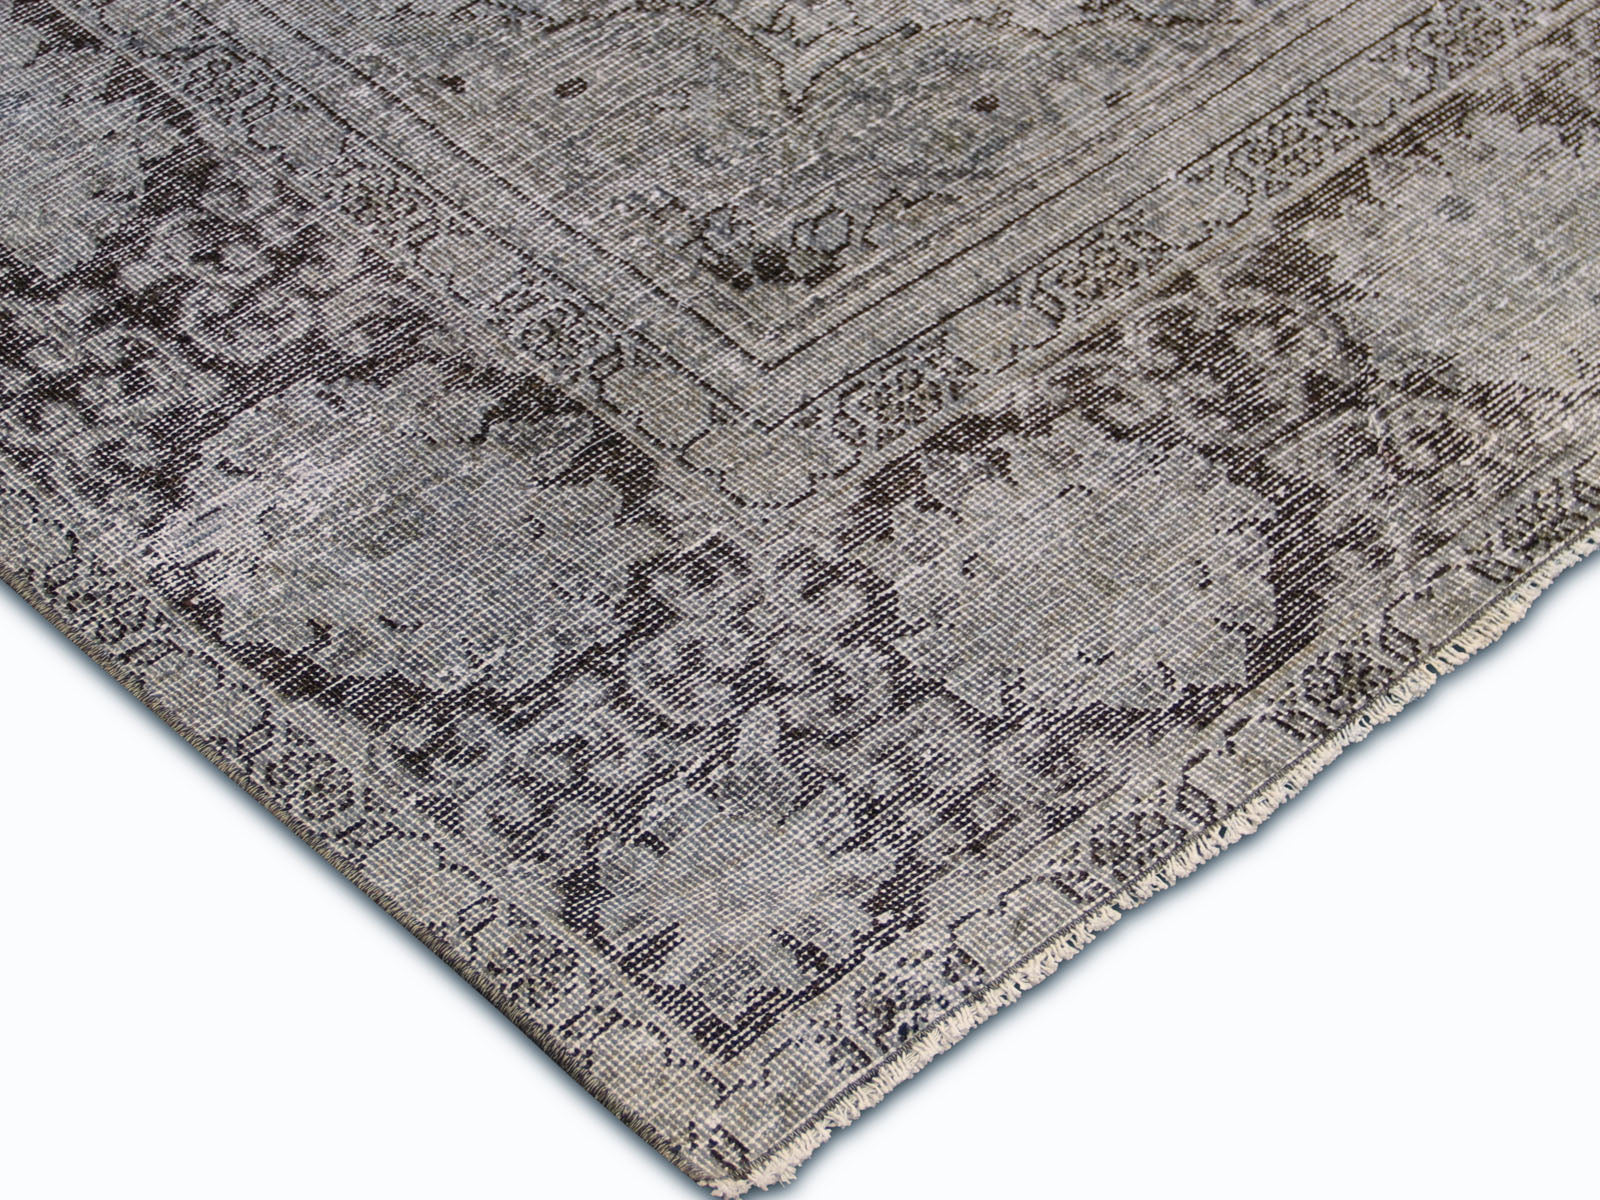 Vintage Persian Meshed Overdyed Rug - 8'4" x 11'5"